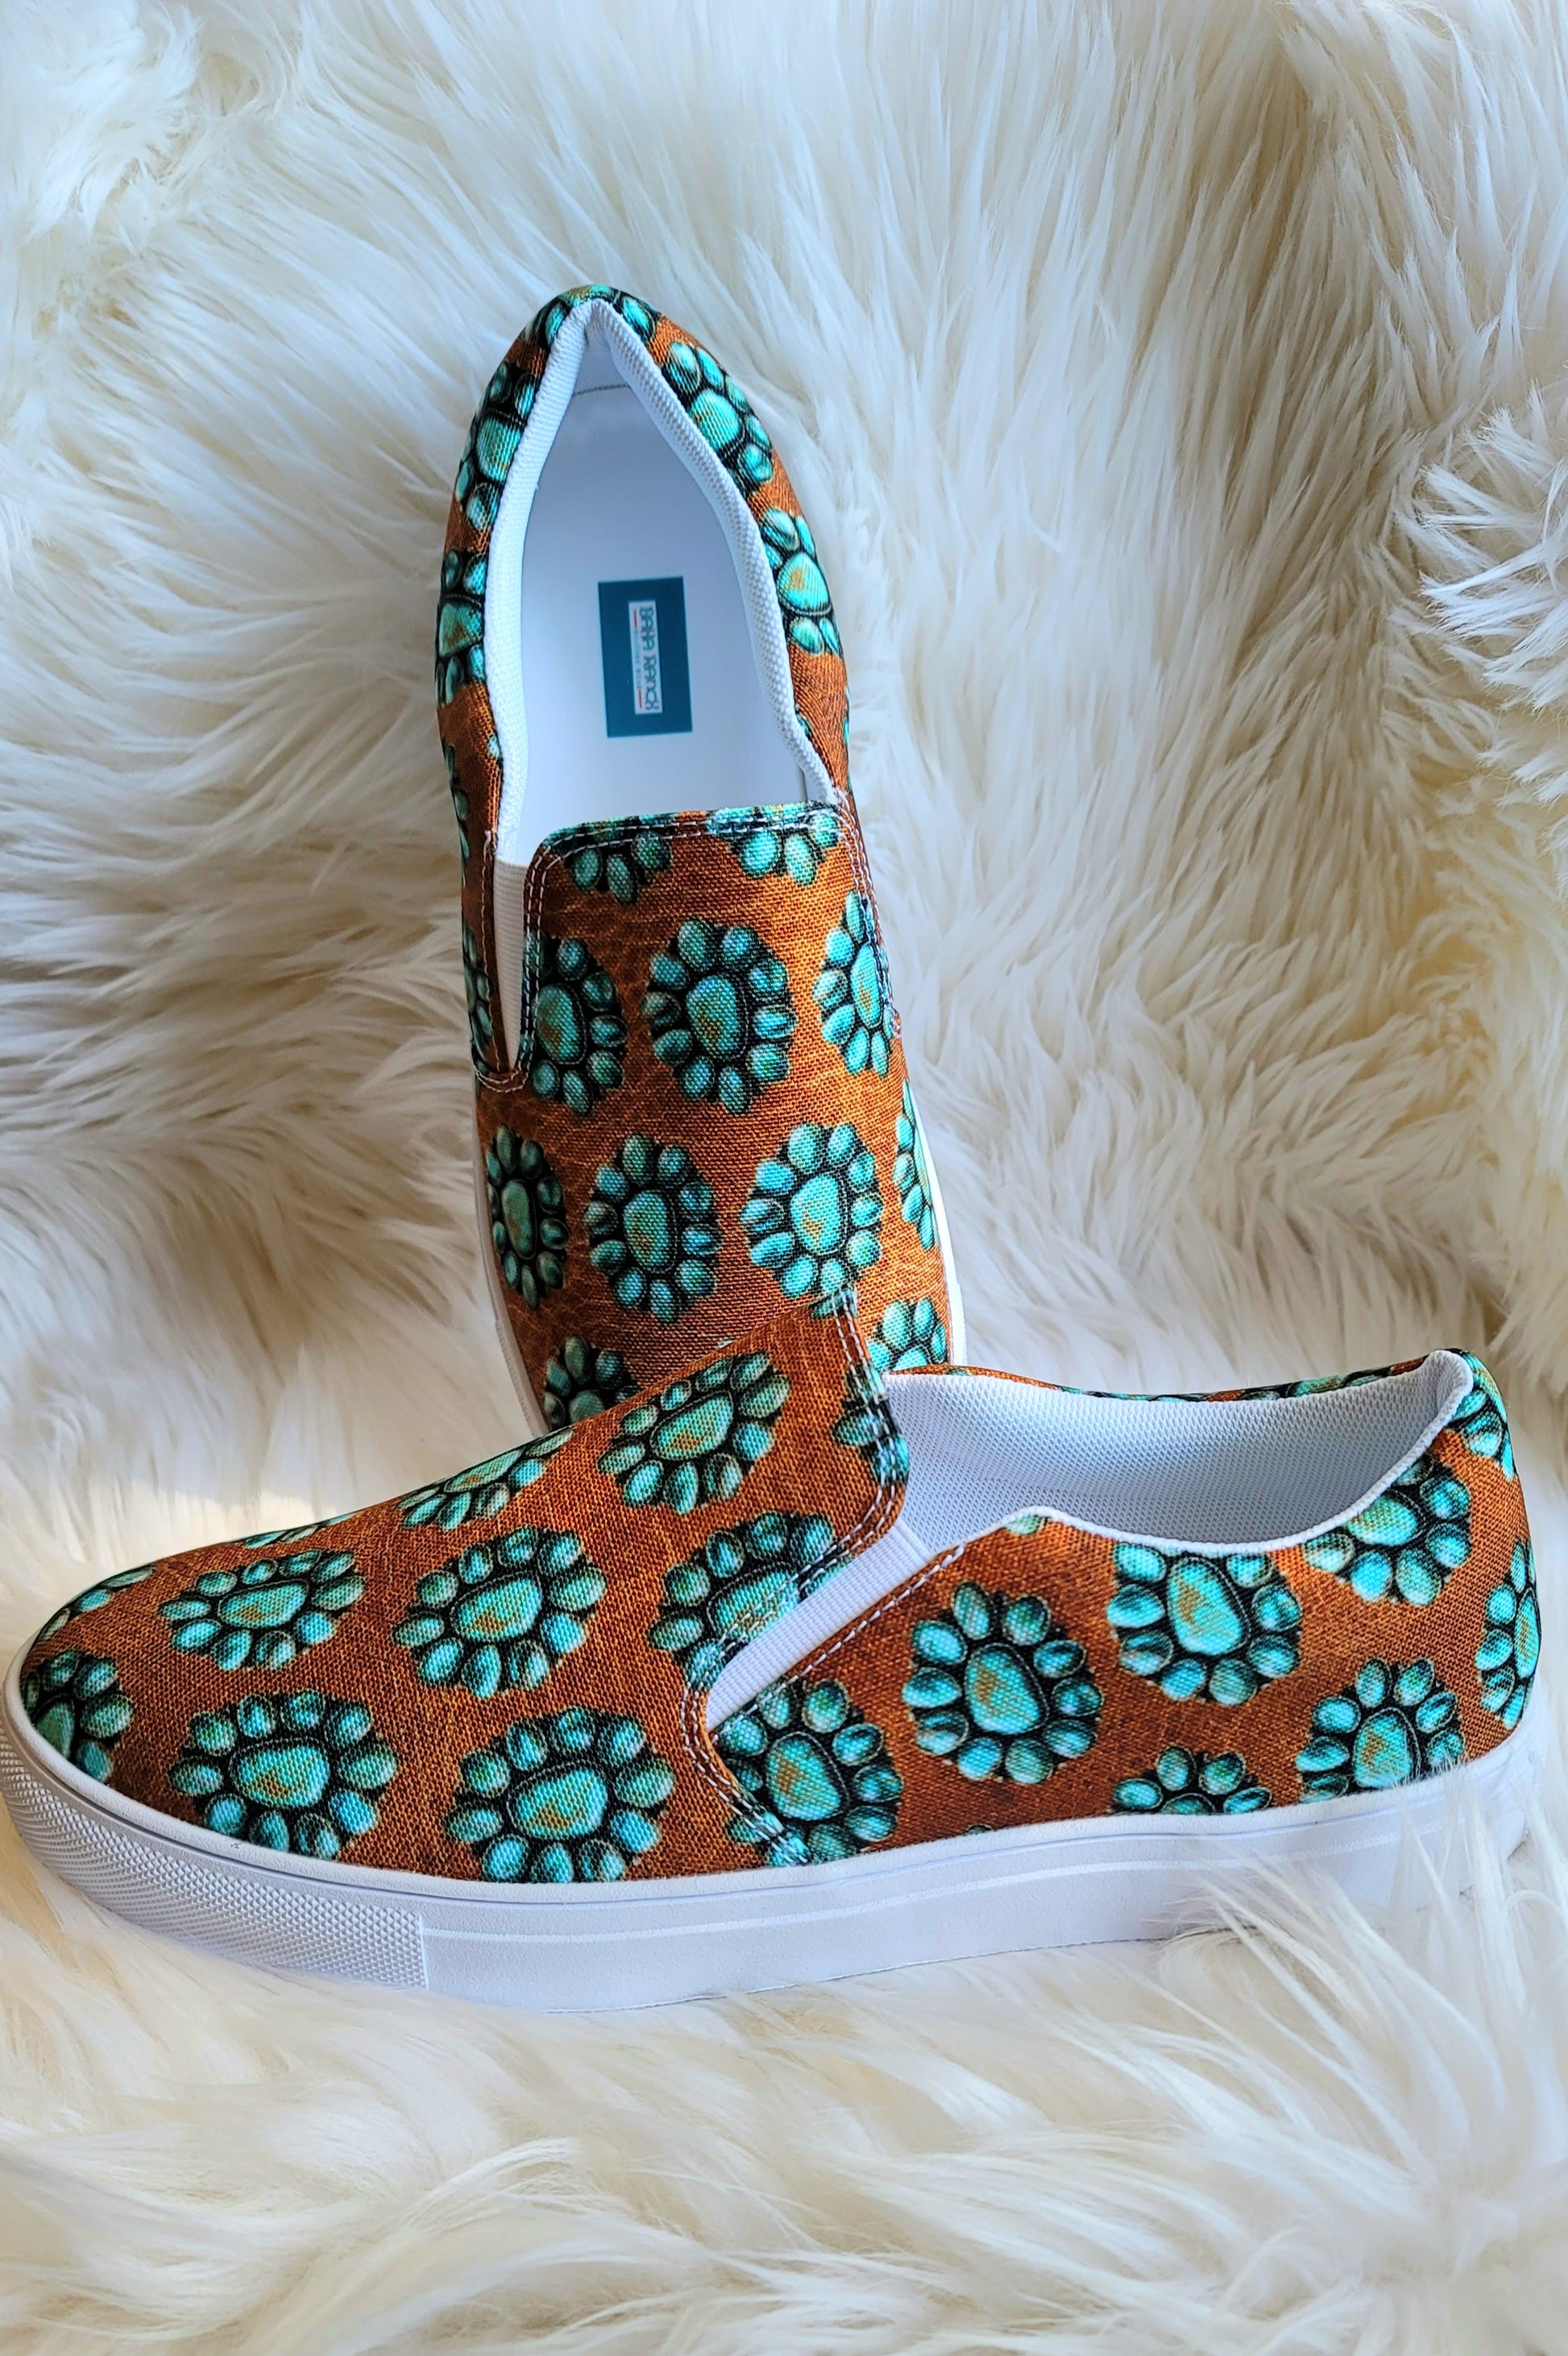 Turquoise Concho Women’s slip-on canvas shoes - concho, conchos, shoe, shoes, slip on shoes, slipon, turquoise, turquoise jewelry -  - Baha Ranch Western Wear